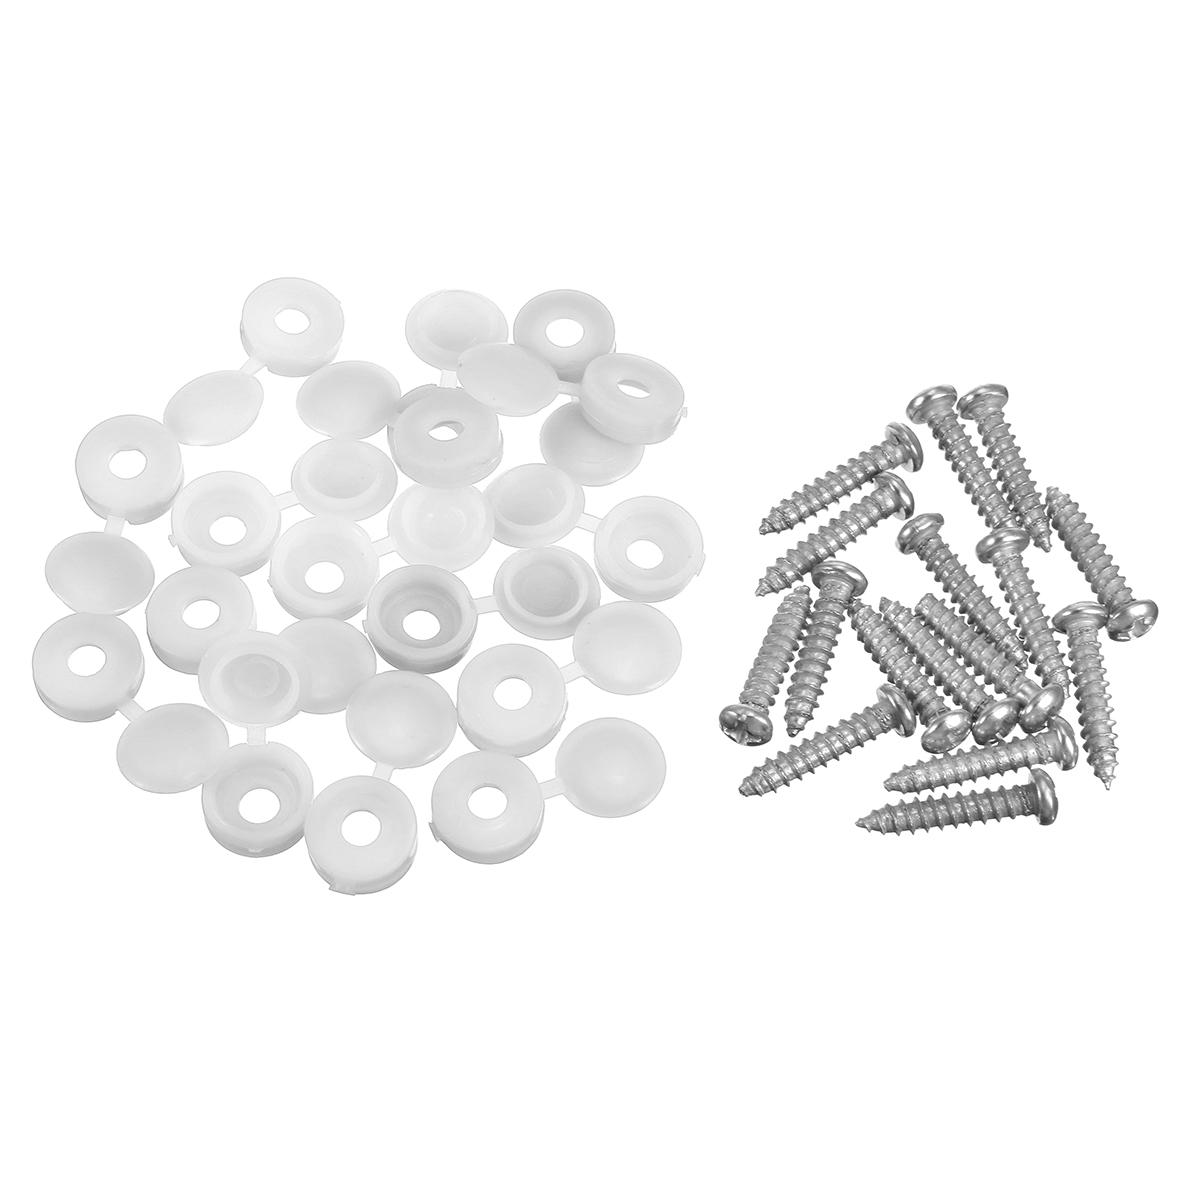 16Pcs Licence Number Plate Phillips Self Tapping Screw with Hinged White Cover Caps